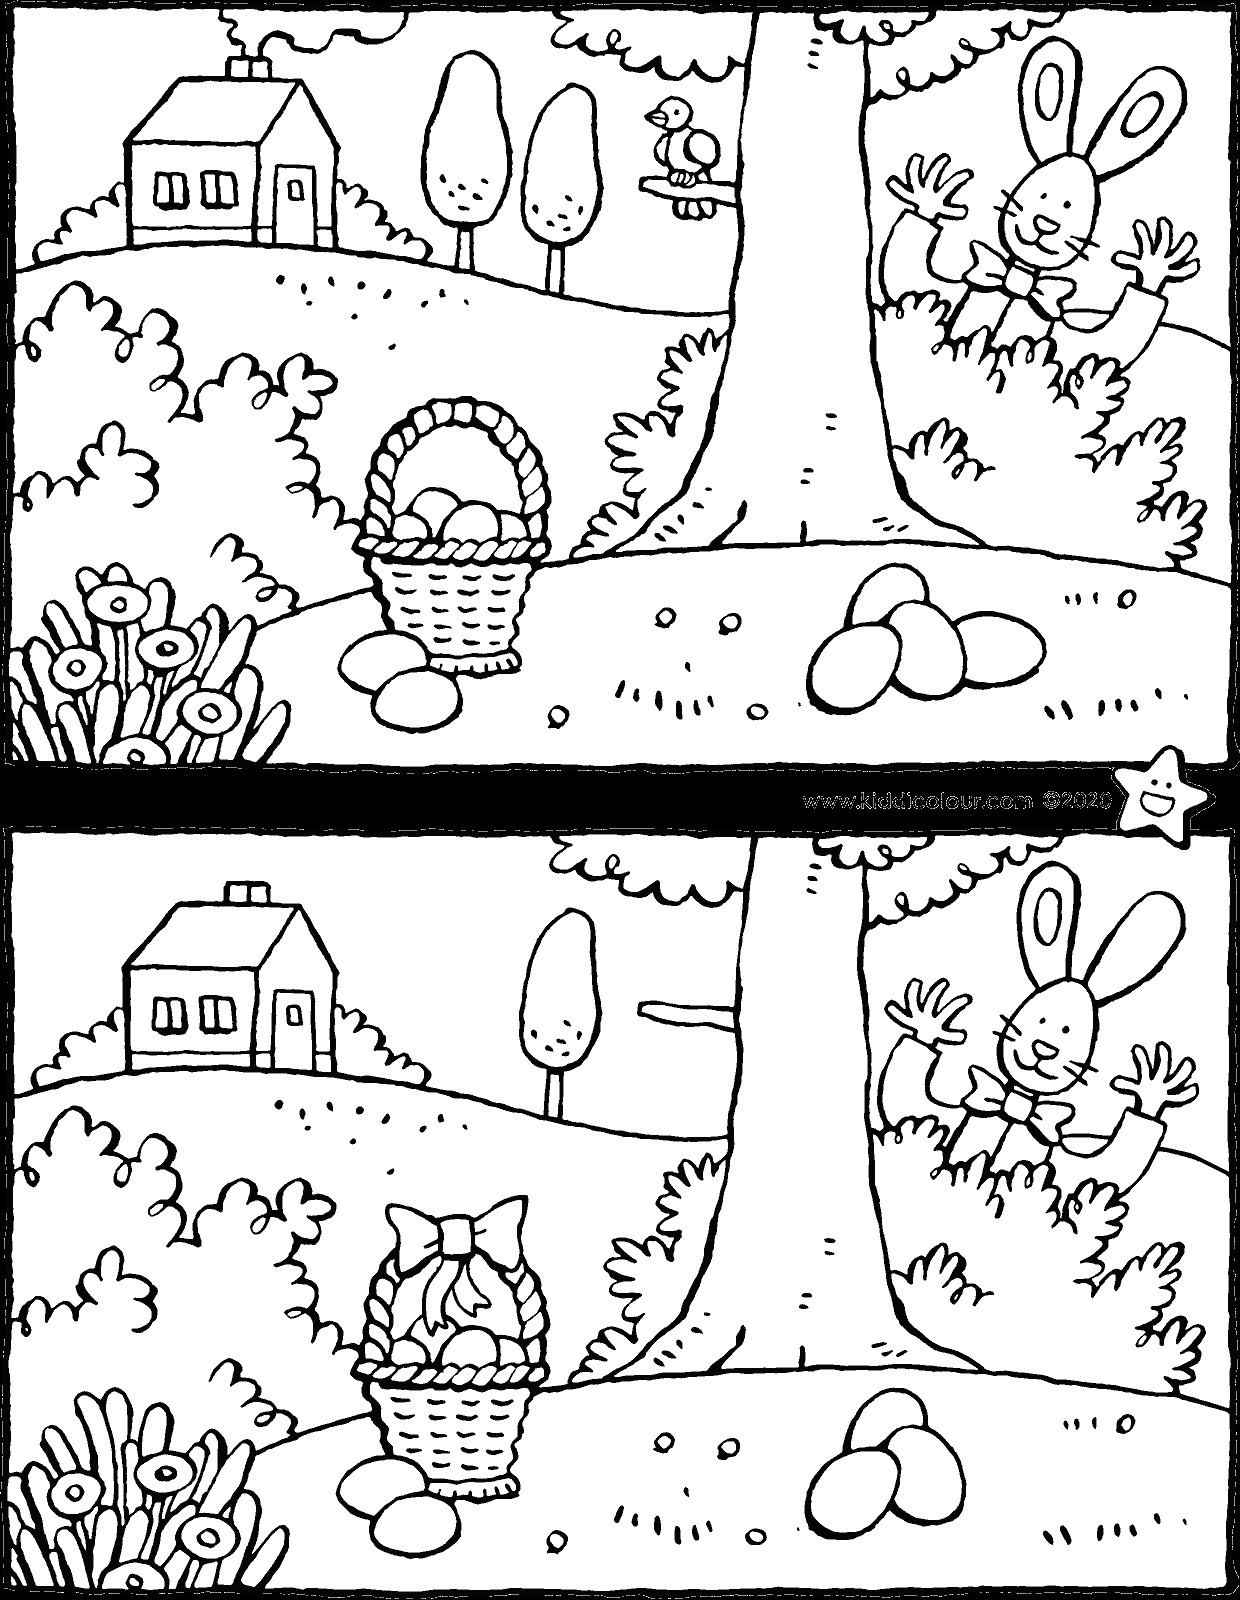 Easter spot the 7 differences colouring page drawing picture 01V